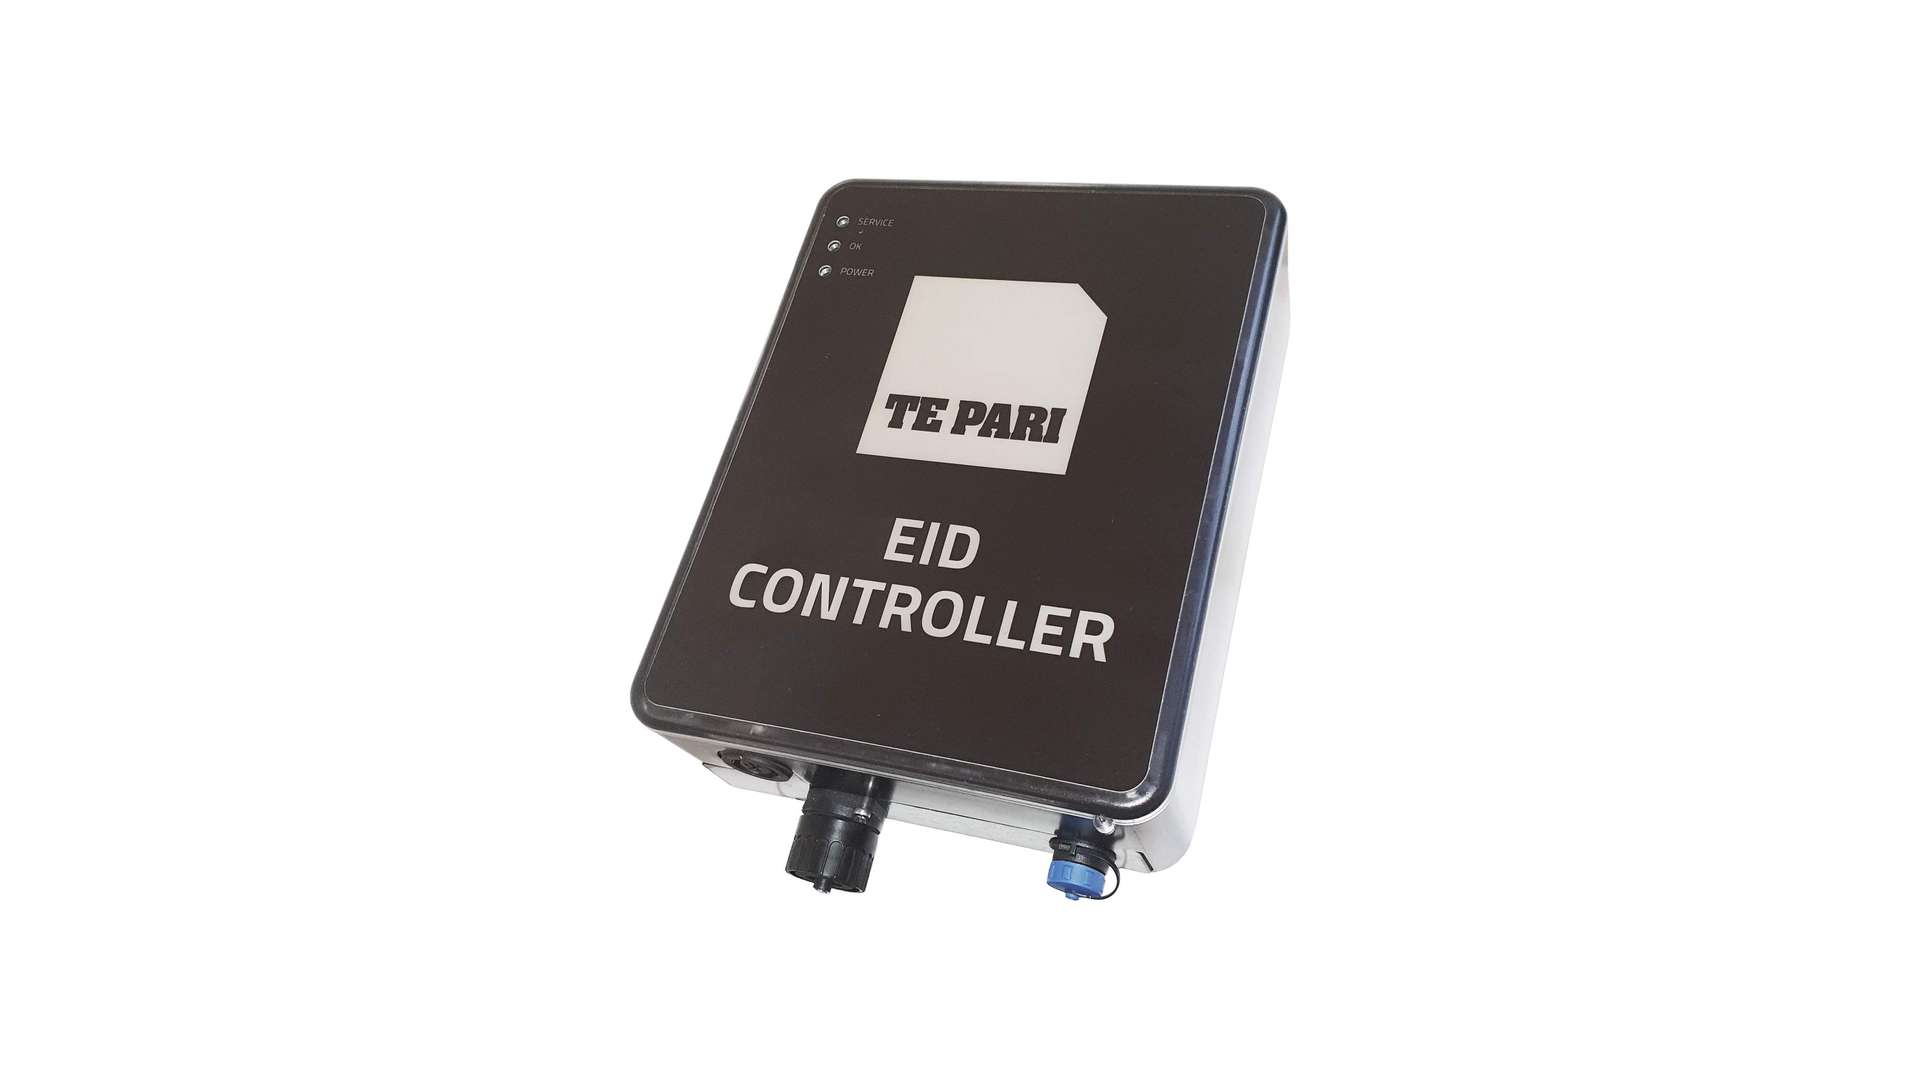 EID Controller with Bluetooth